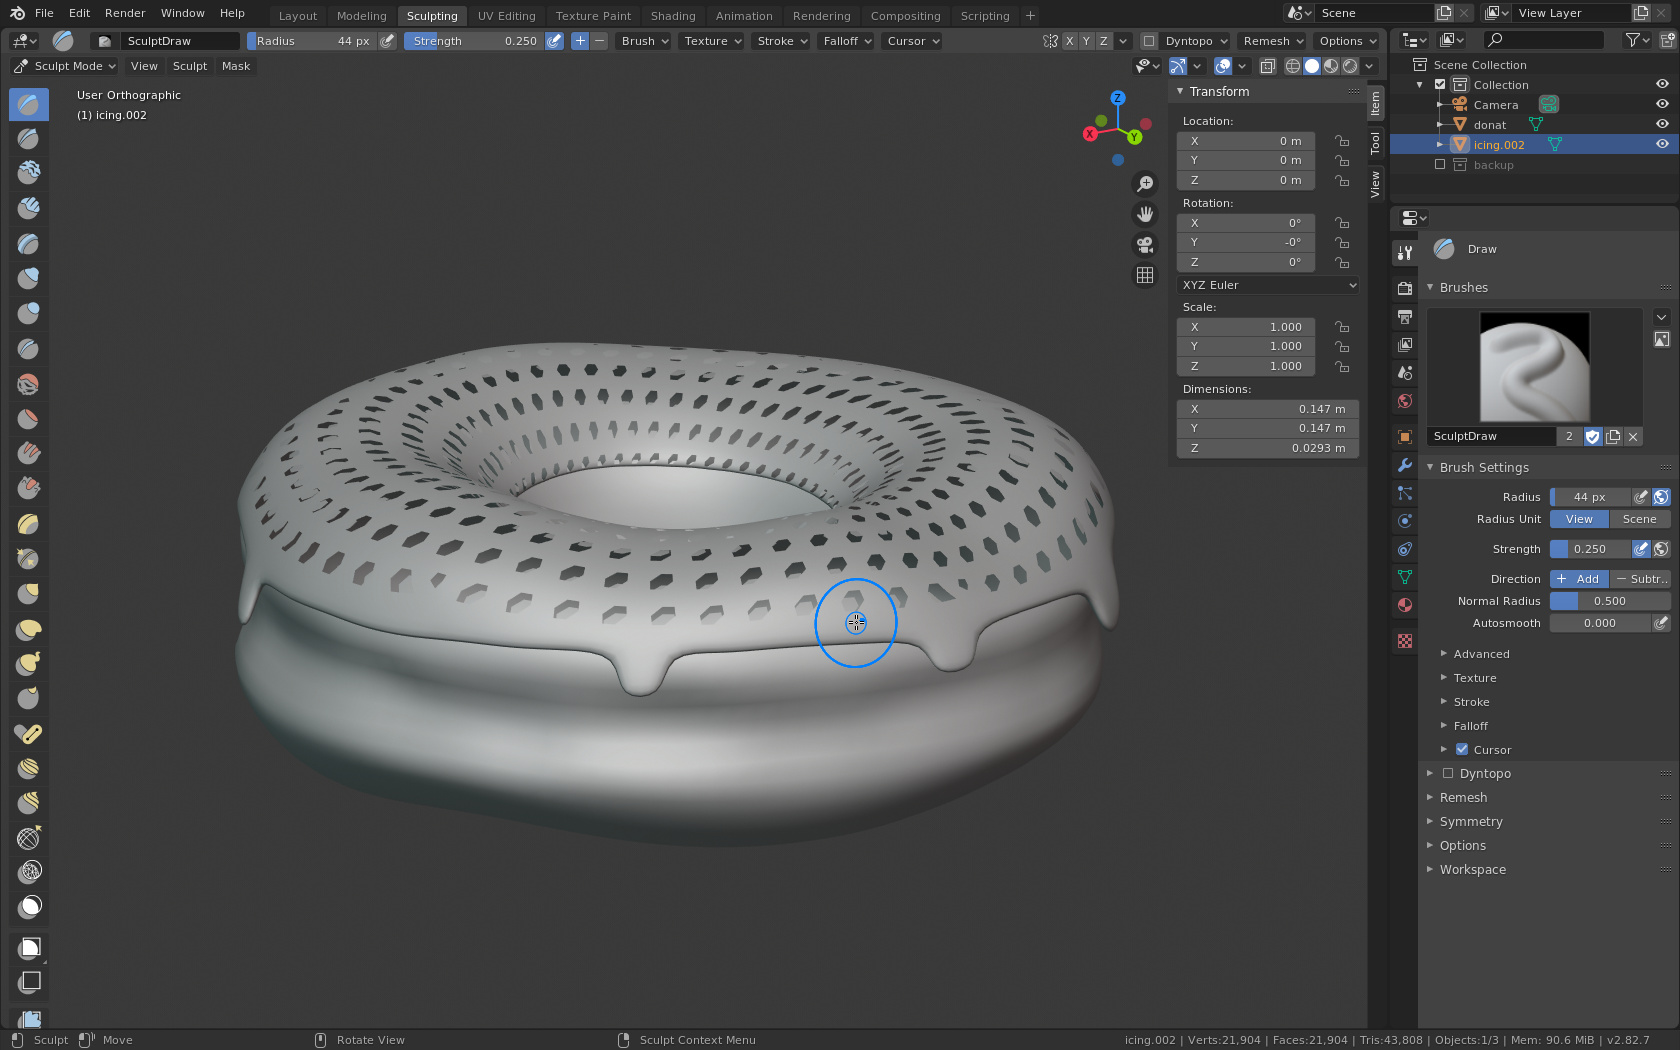 Sea anemone feed Aboard Holes on mesh when moving from modeling to sculpt - Modeling - Blender  Artists Community